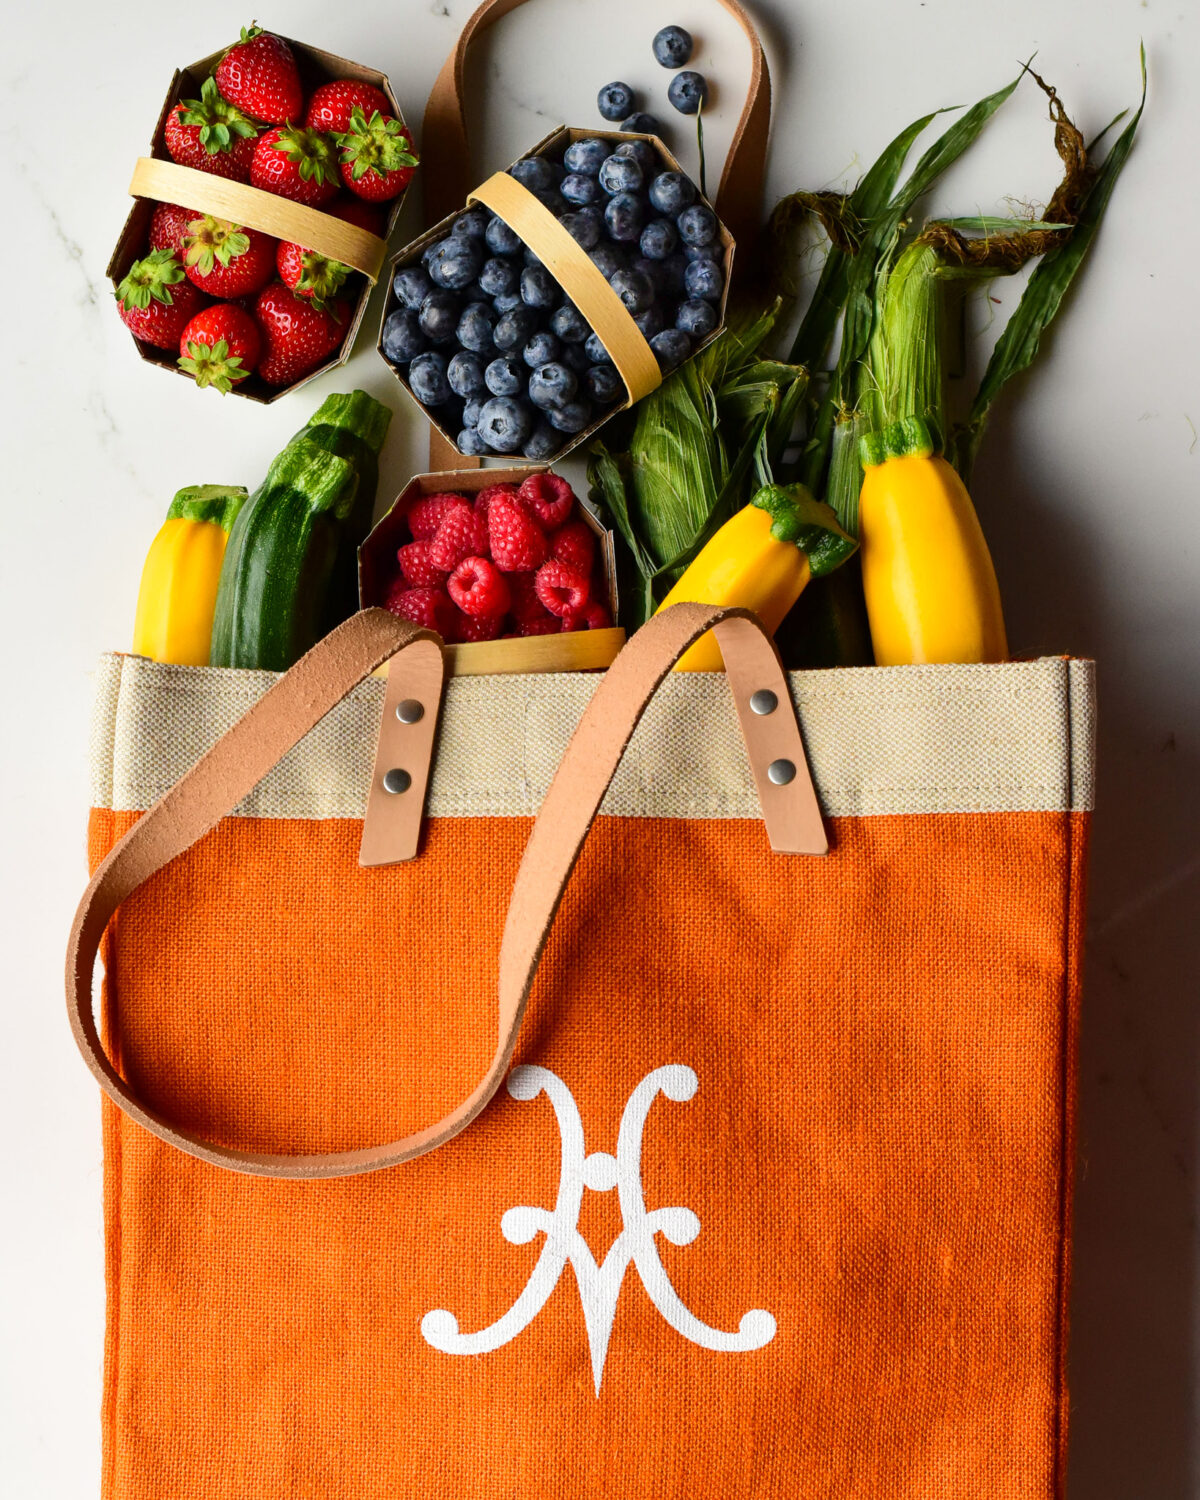 An orange market bag with fresh berries and vegetables.